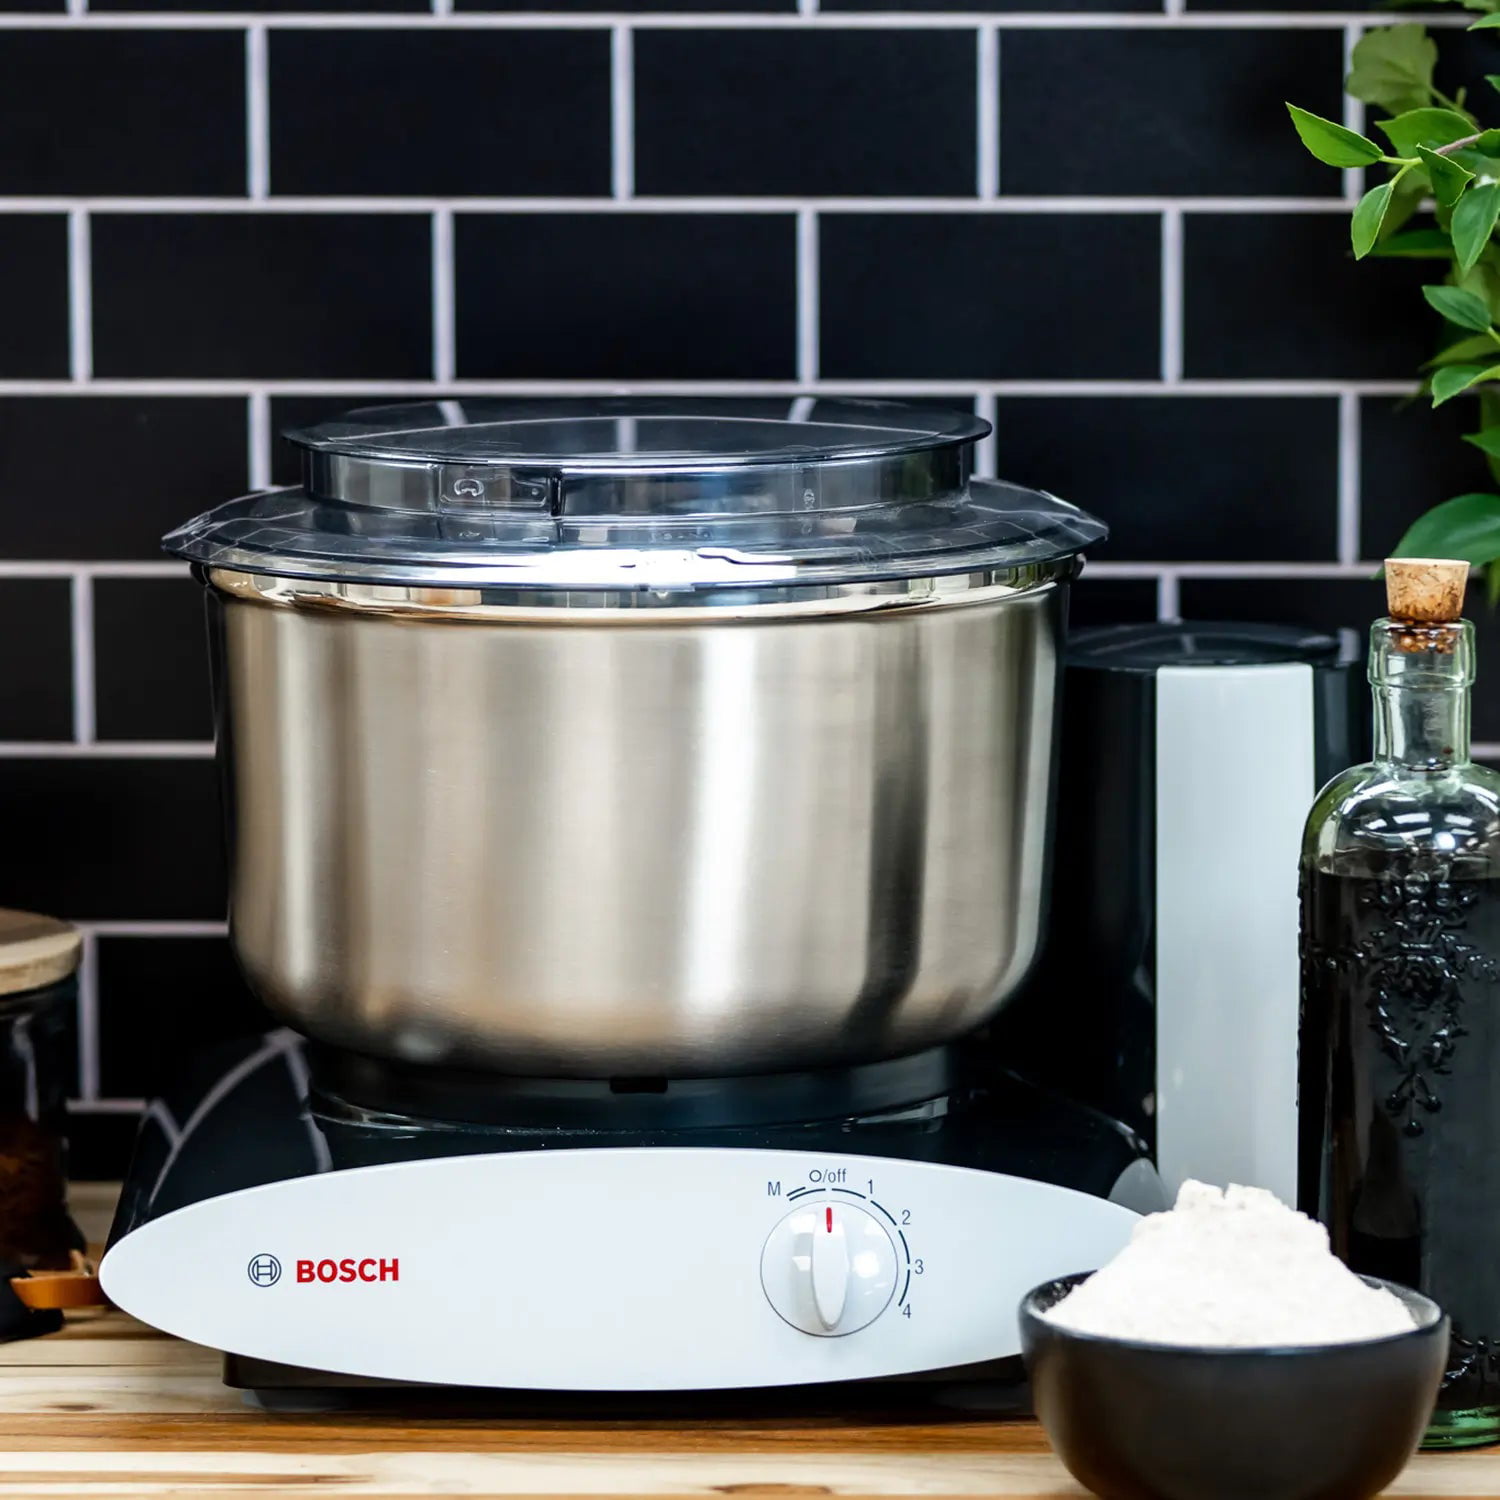 Bosch Universal Plus Black w/Stainless Bowl - Spoil the Cook